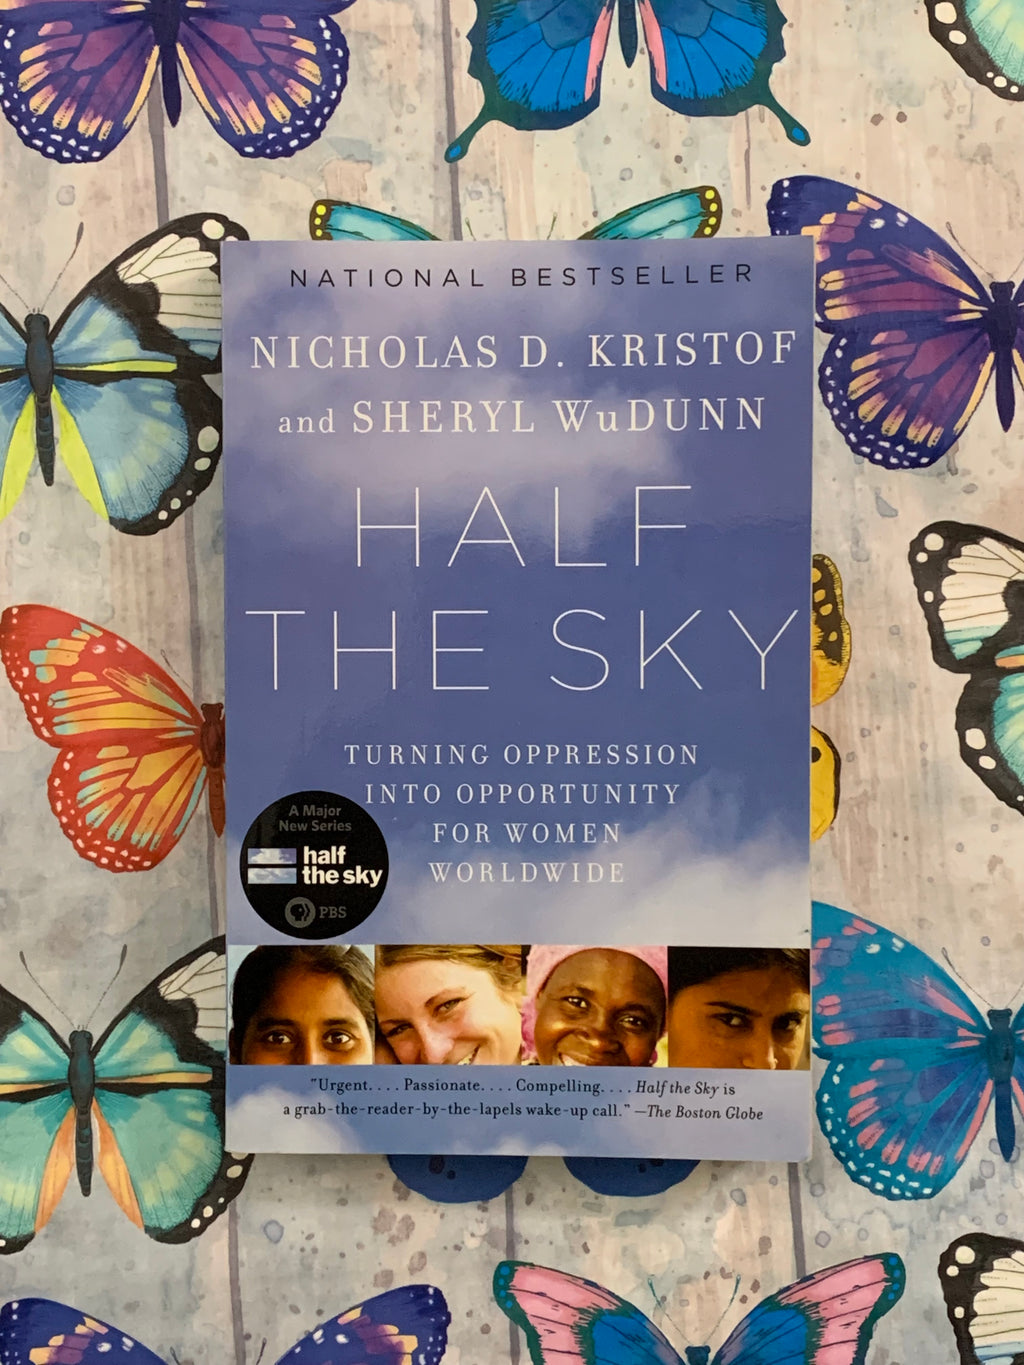 Half the Sky: Turning Oppression Into Opportunity for Women- By Nicholas D Kristof and Sheryl WuDunn